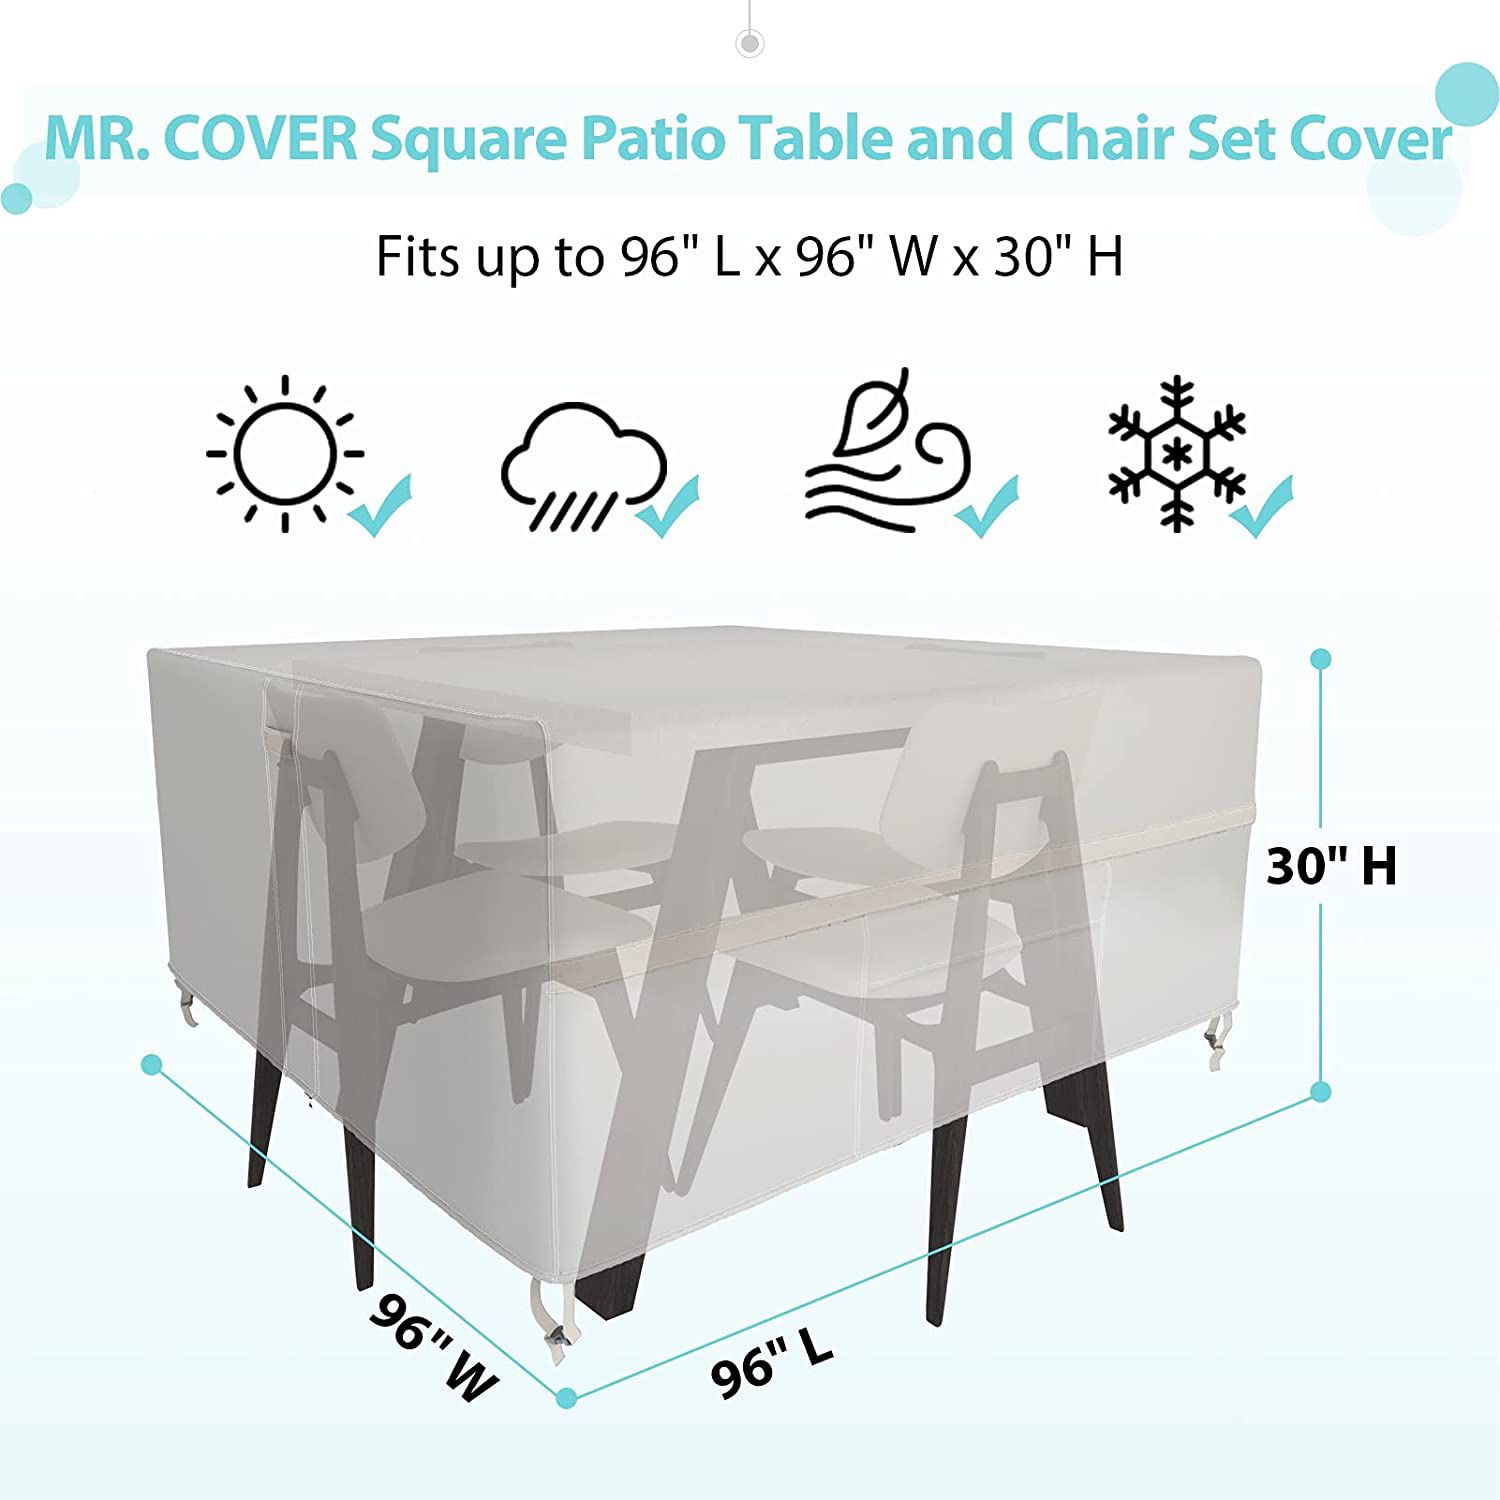 MR. COVER Square Patio Table Cover, Outdoor Dining Set Cover, 96L x 96W x 30H, Waterproof & UV-Protection, Strong & Sturdy, Beige, Amenre Series